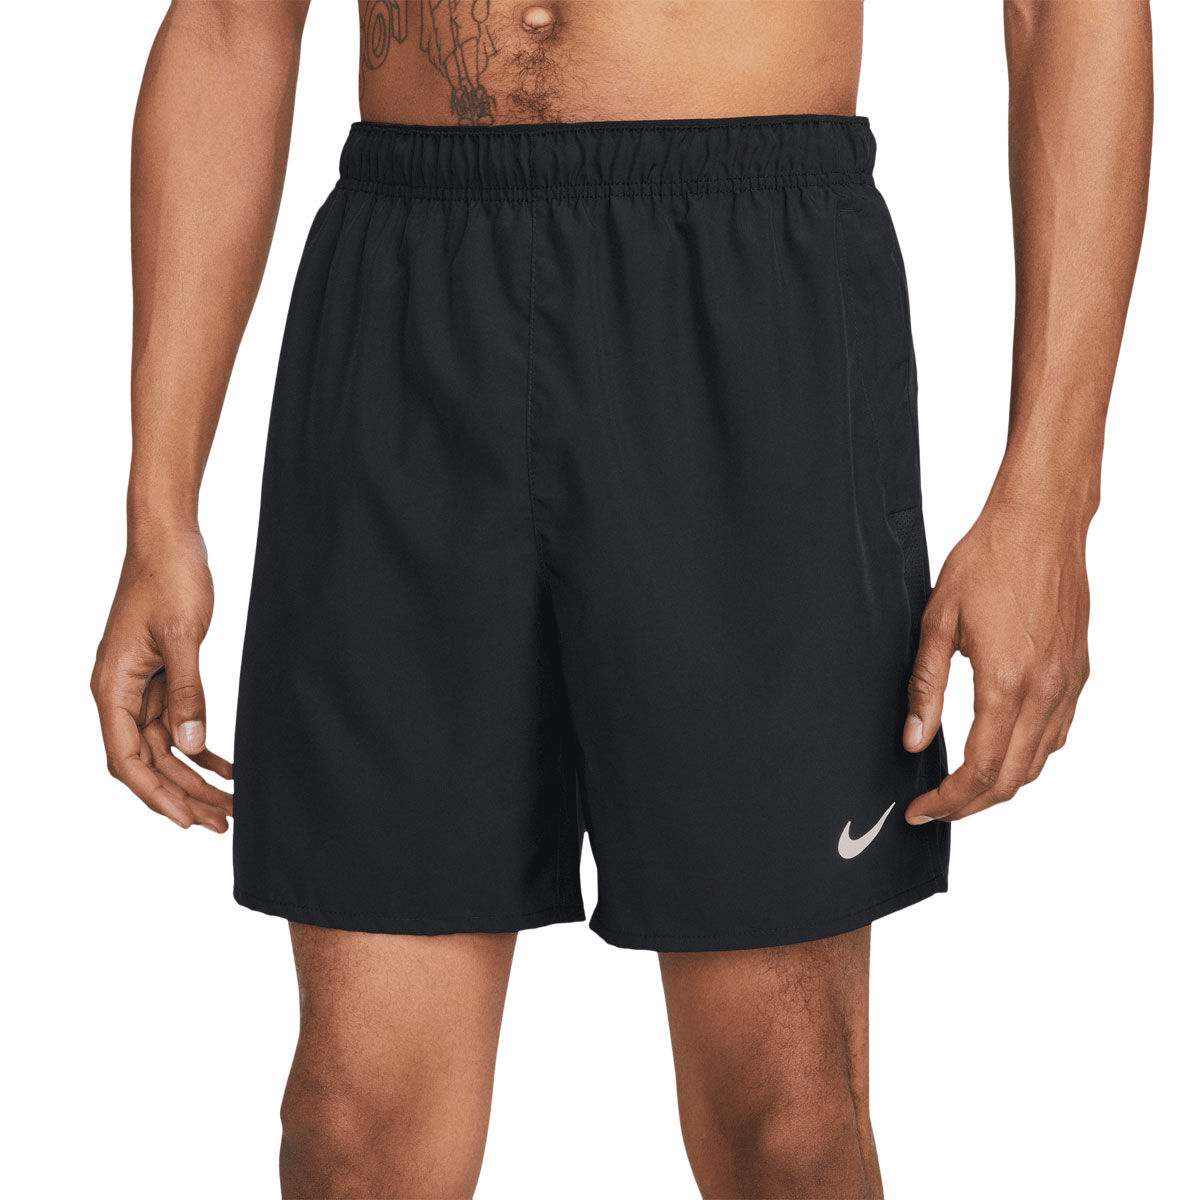 Men's Running Clothing and Shoes